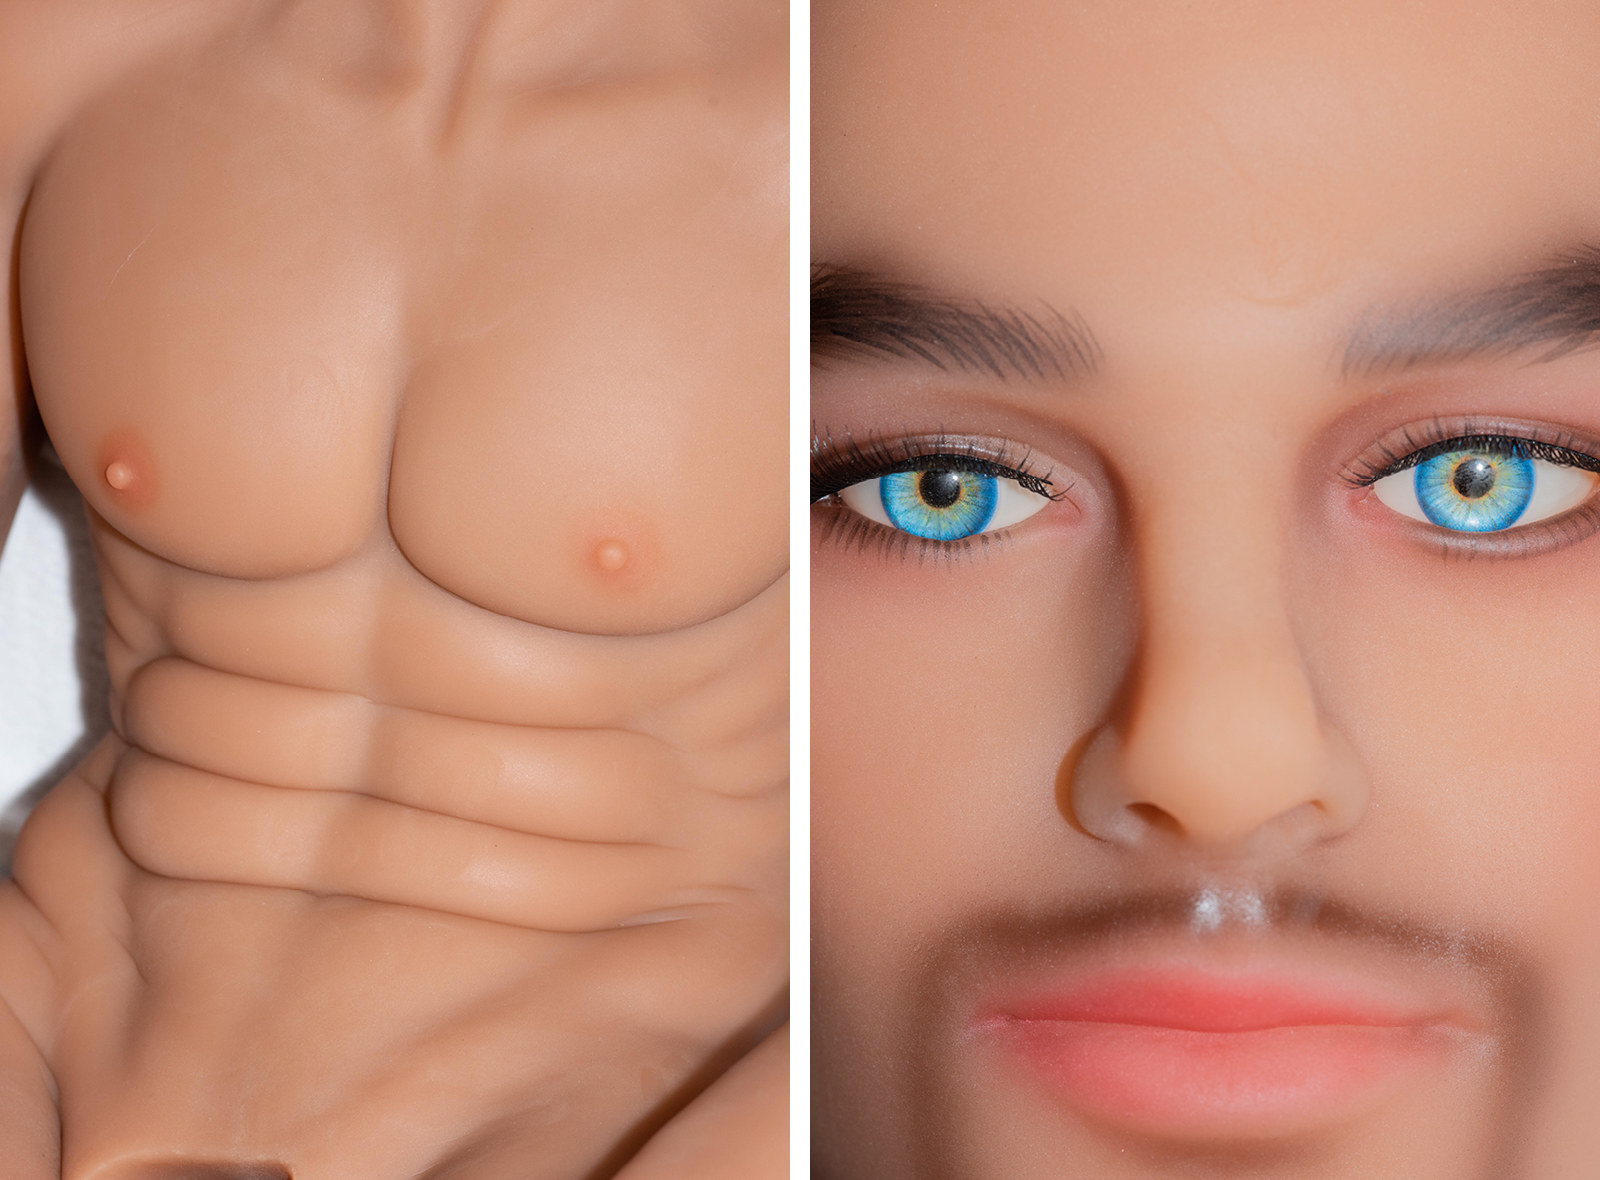 Male Sex Dolls Theyre Not Just For